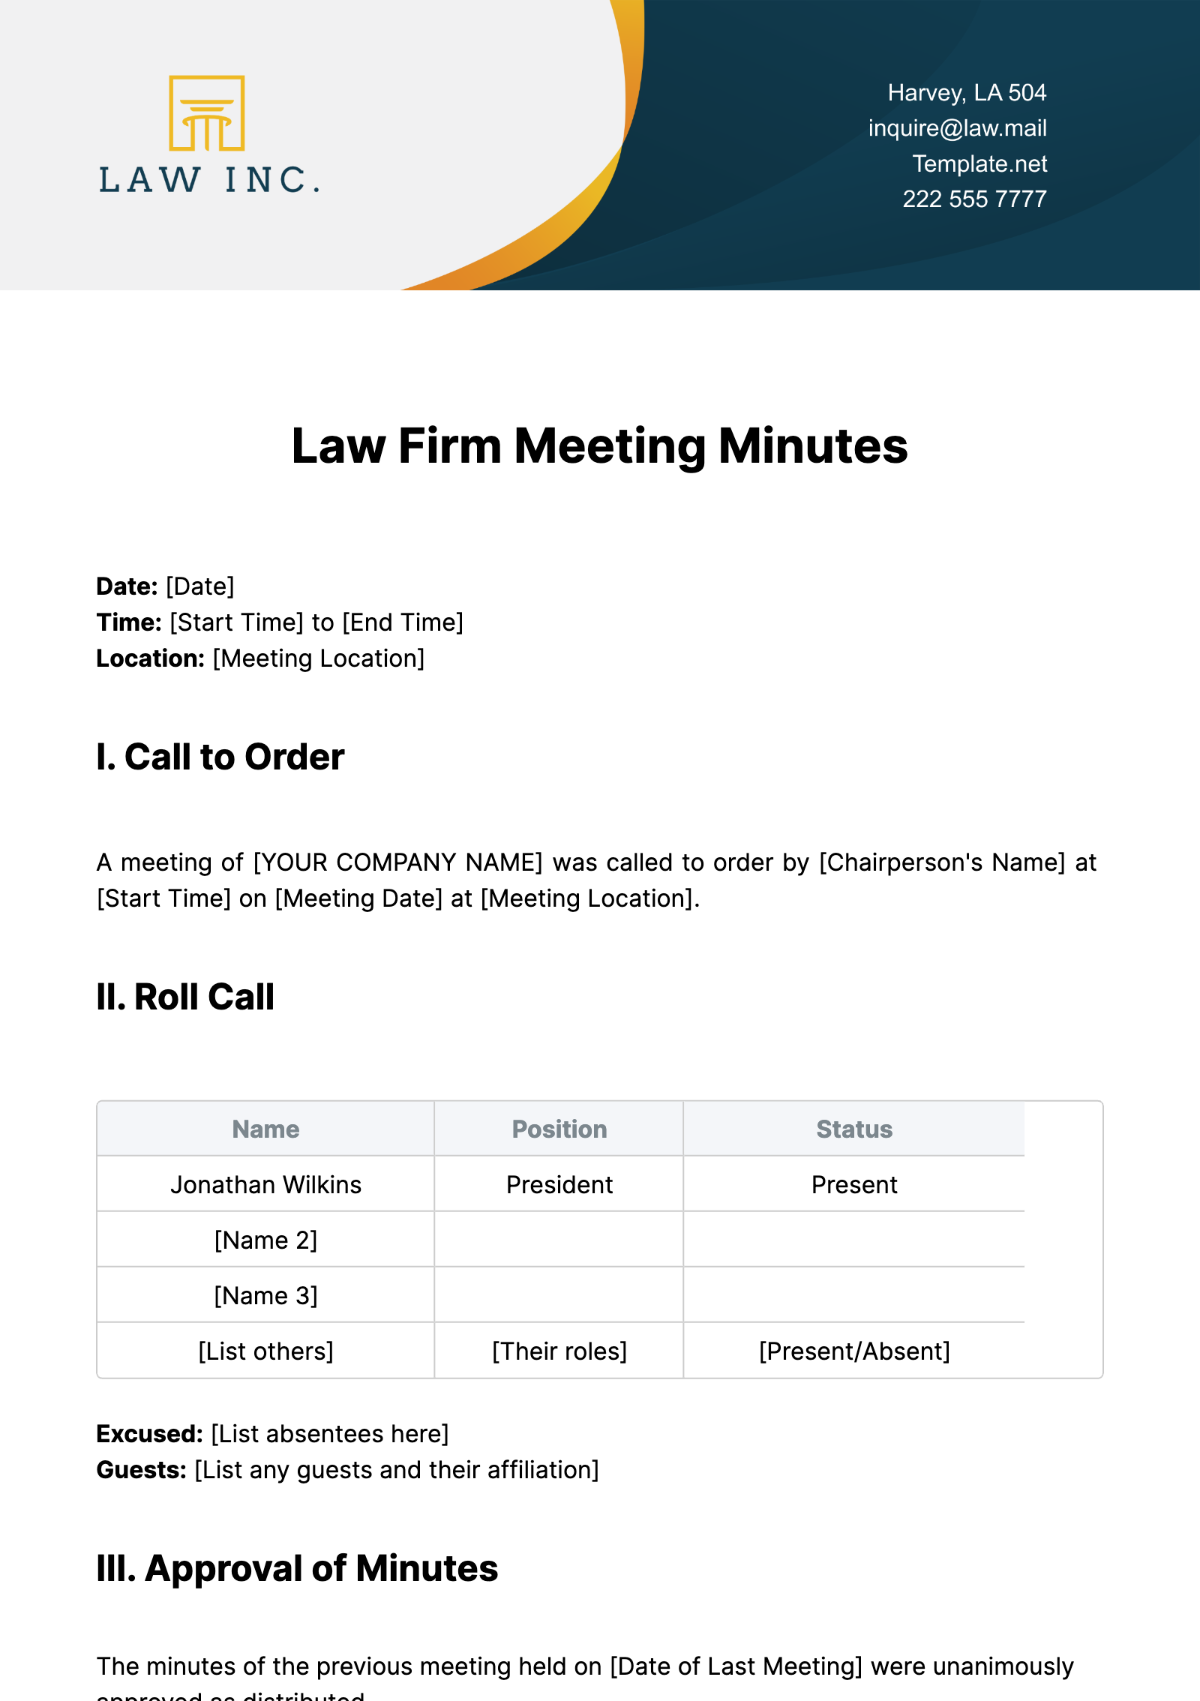 Free Law Firm Legal Meeting Minutes Template